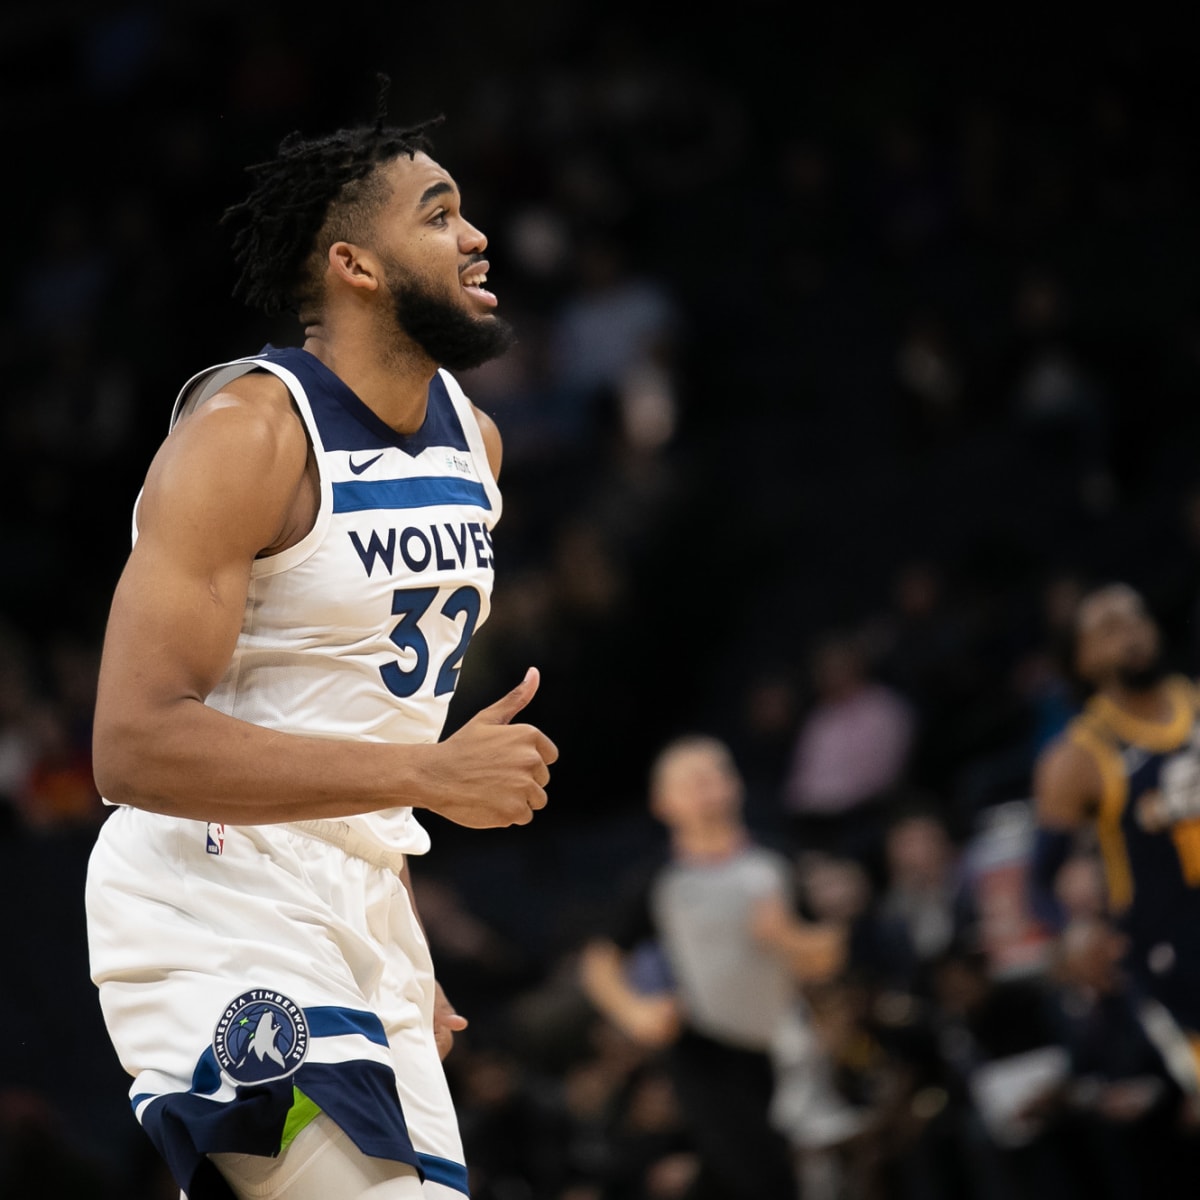 Karl-Anthony Towns is making an emotional comeback after losing